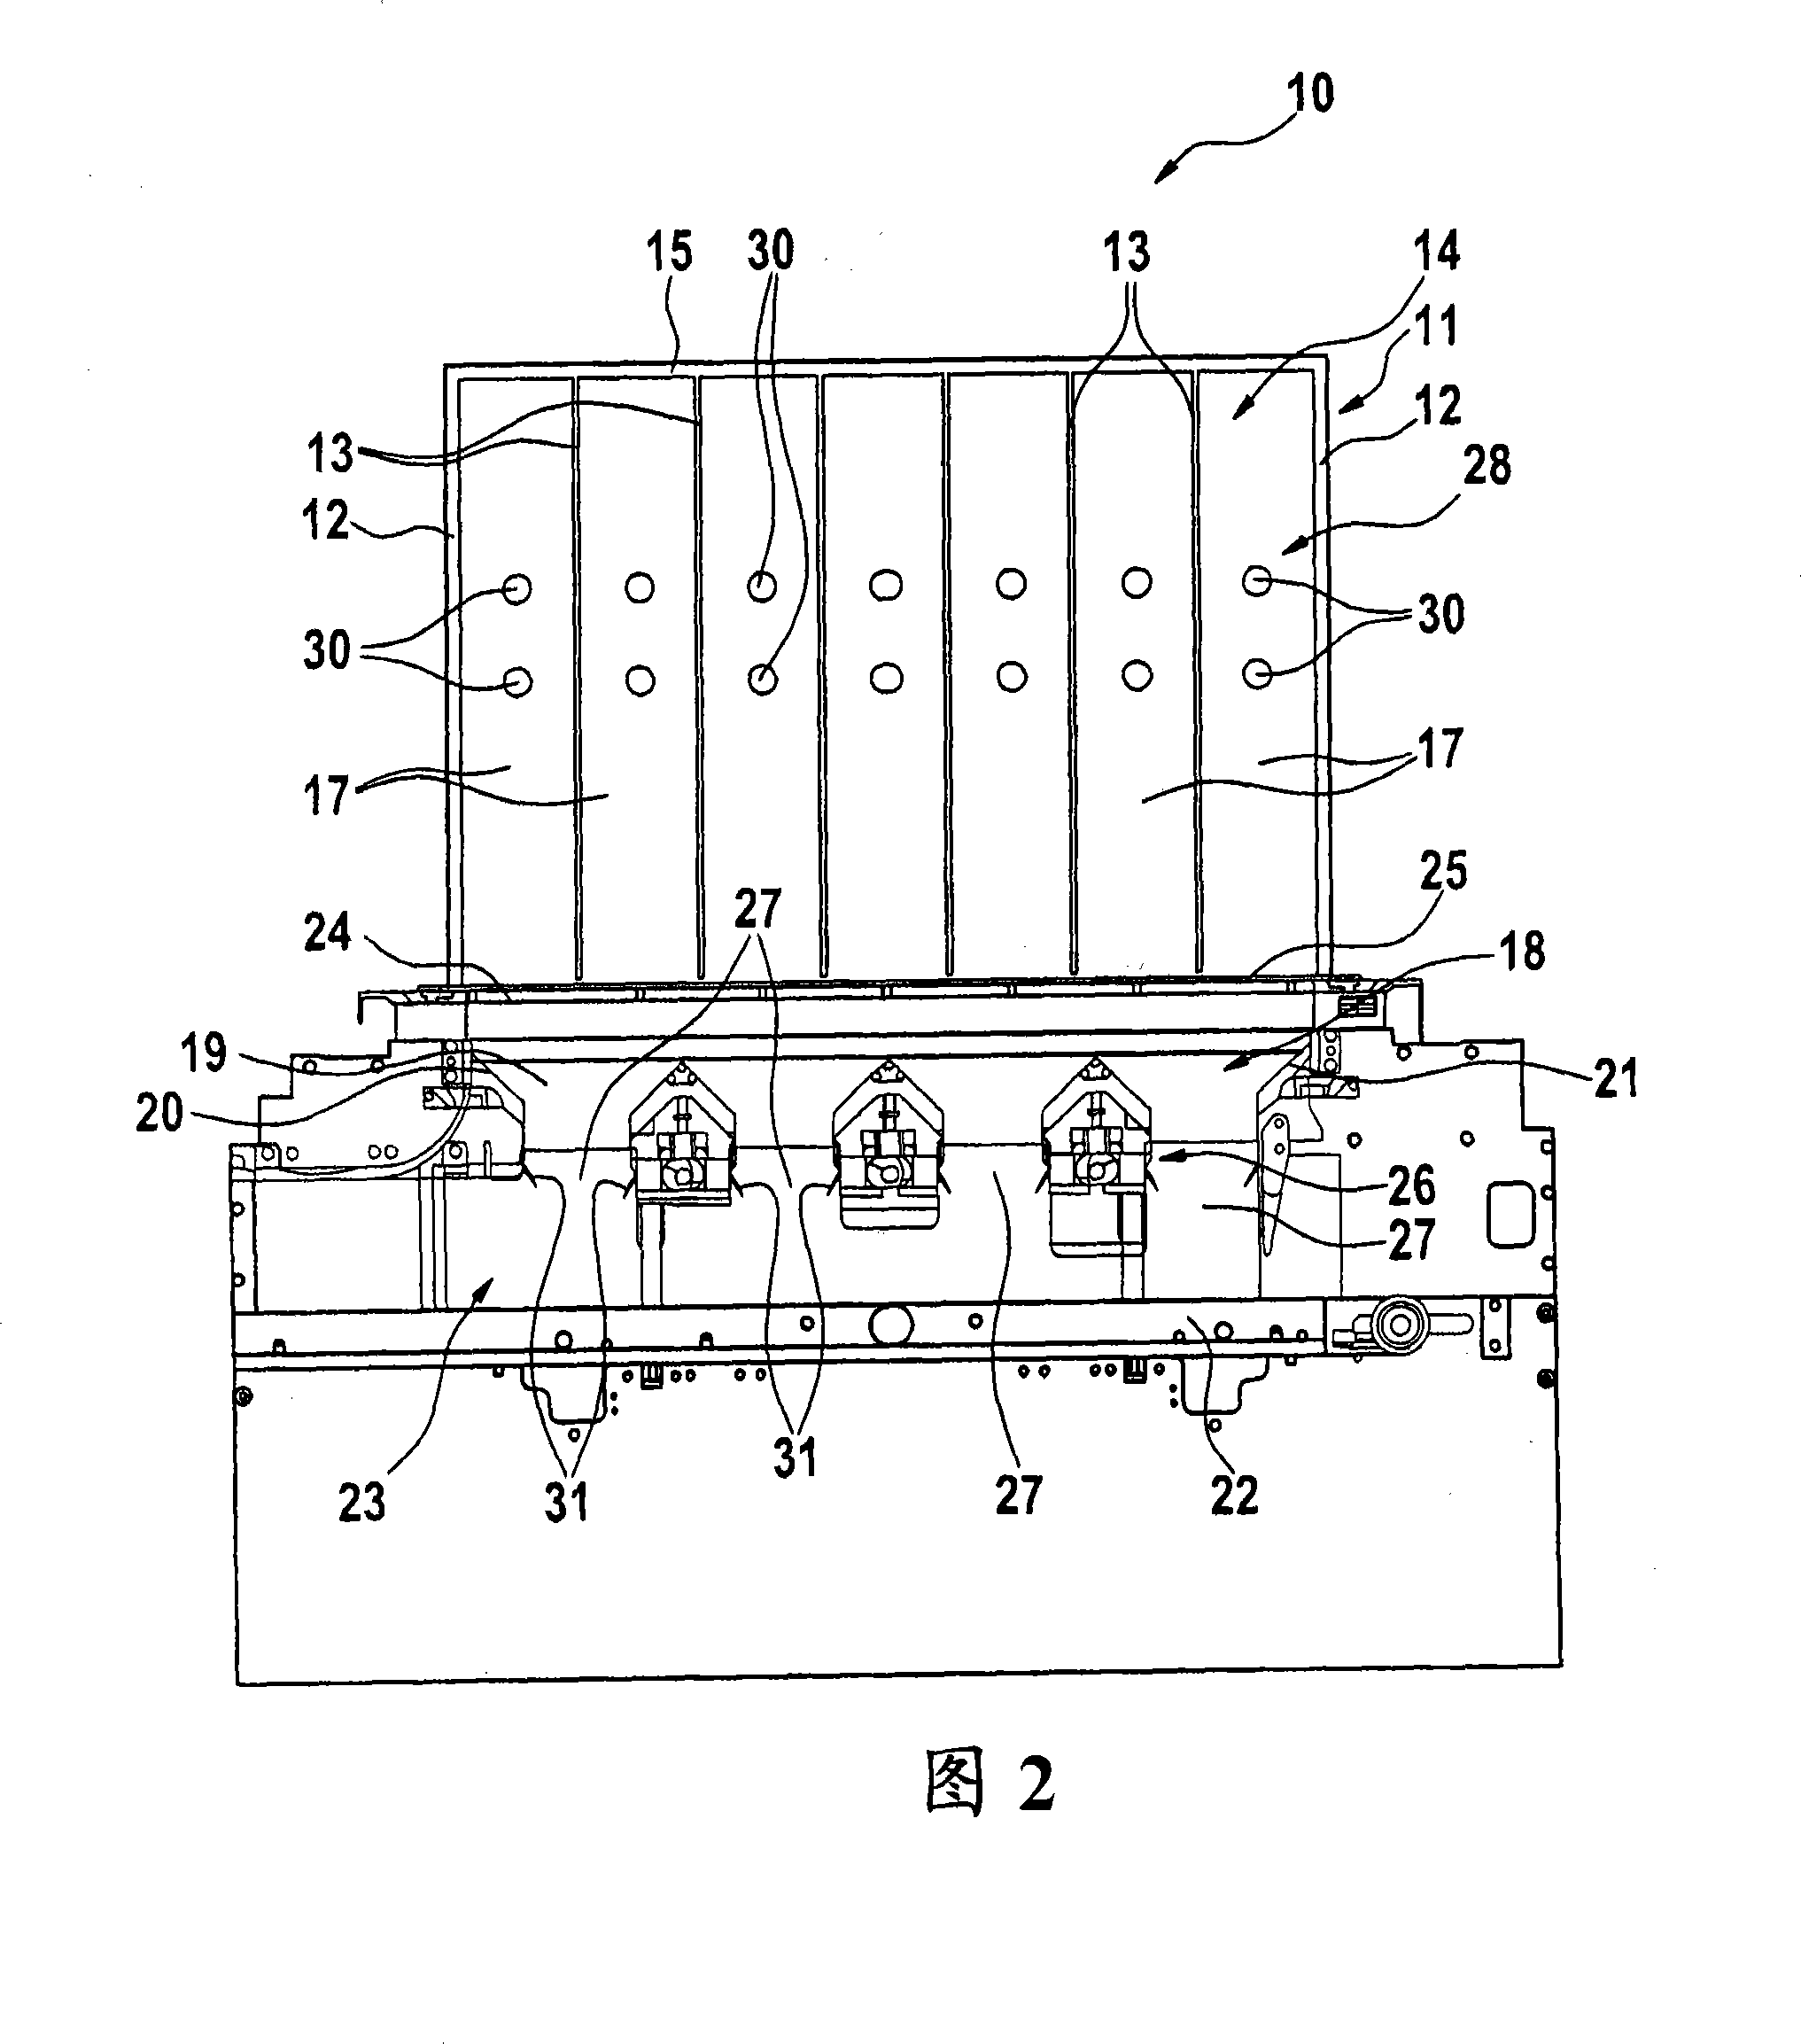 Discharge hopper and method of discharing trays filled with rod-shaped articles